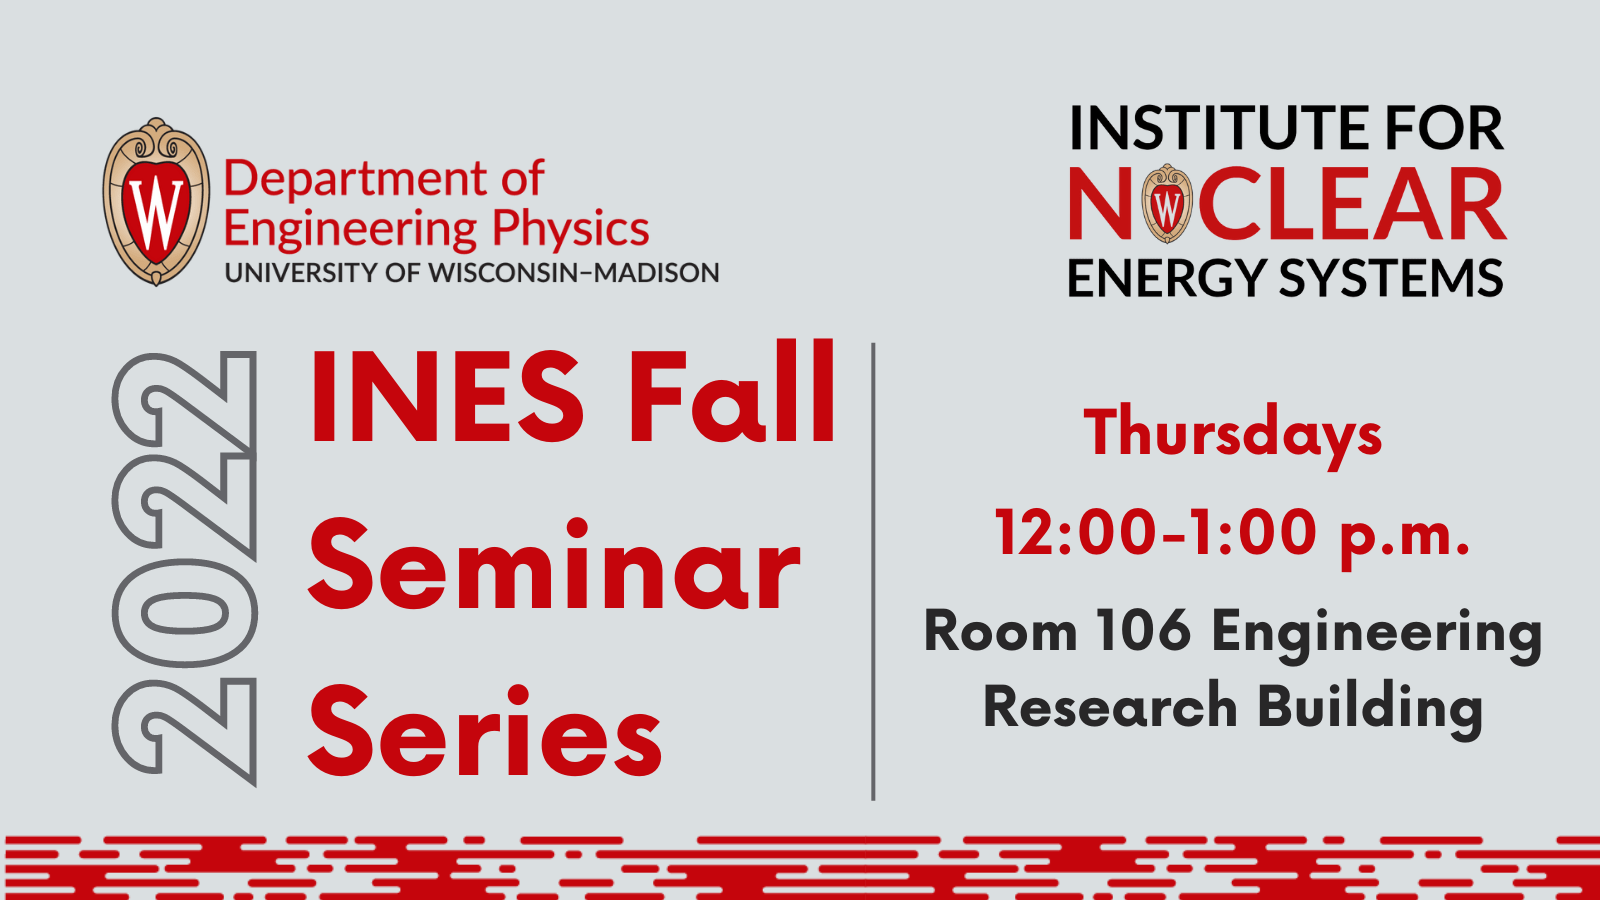 2022 INES Fall Seminar Series, Institute for Nuclear Energy Systems, Thursday's 12-1pm Room 106 Engineering Research building